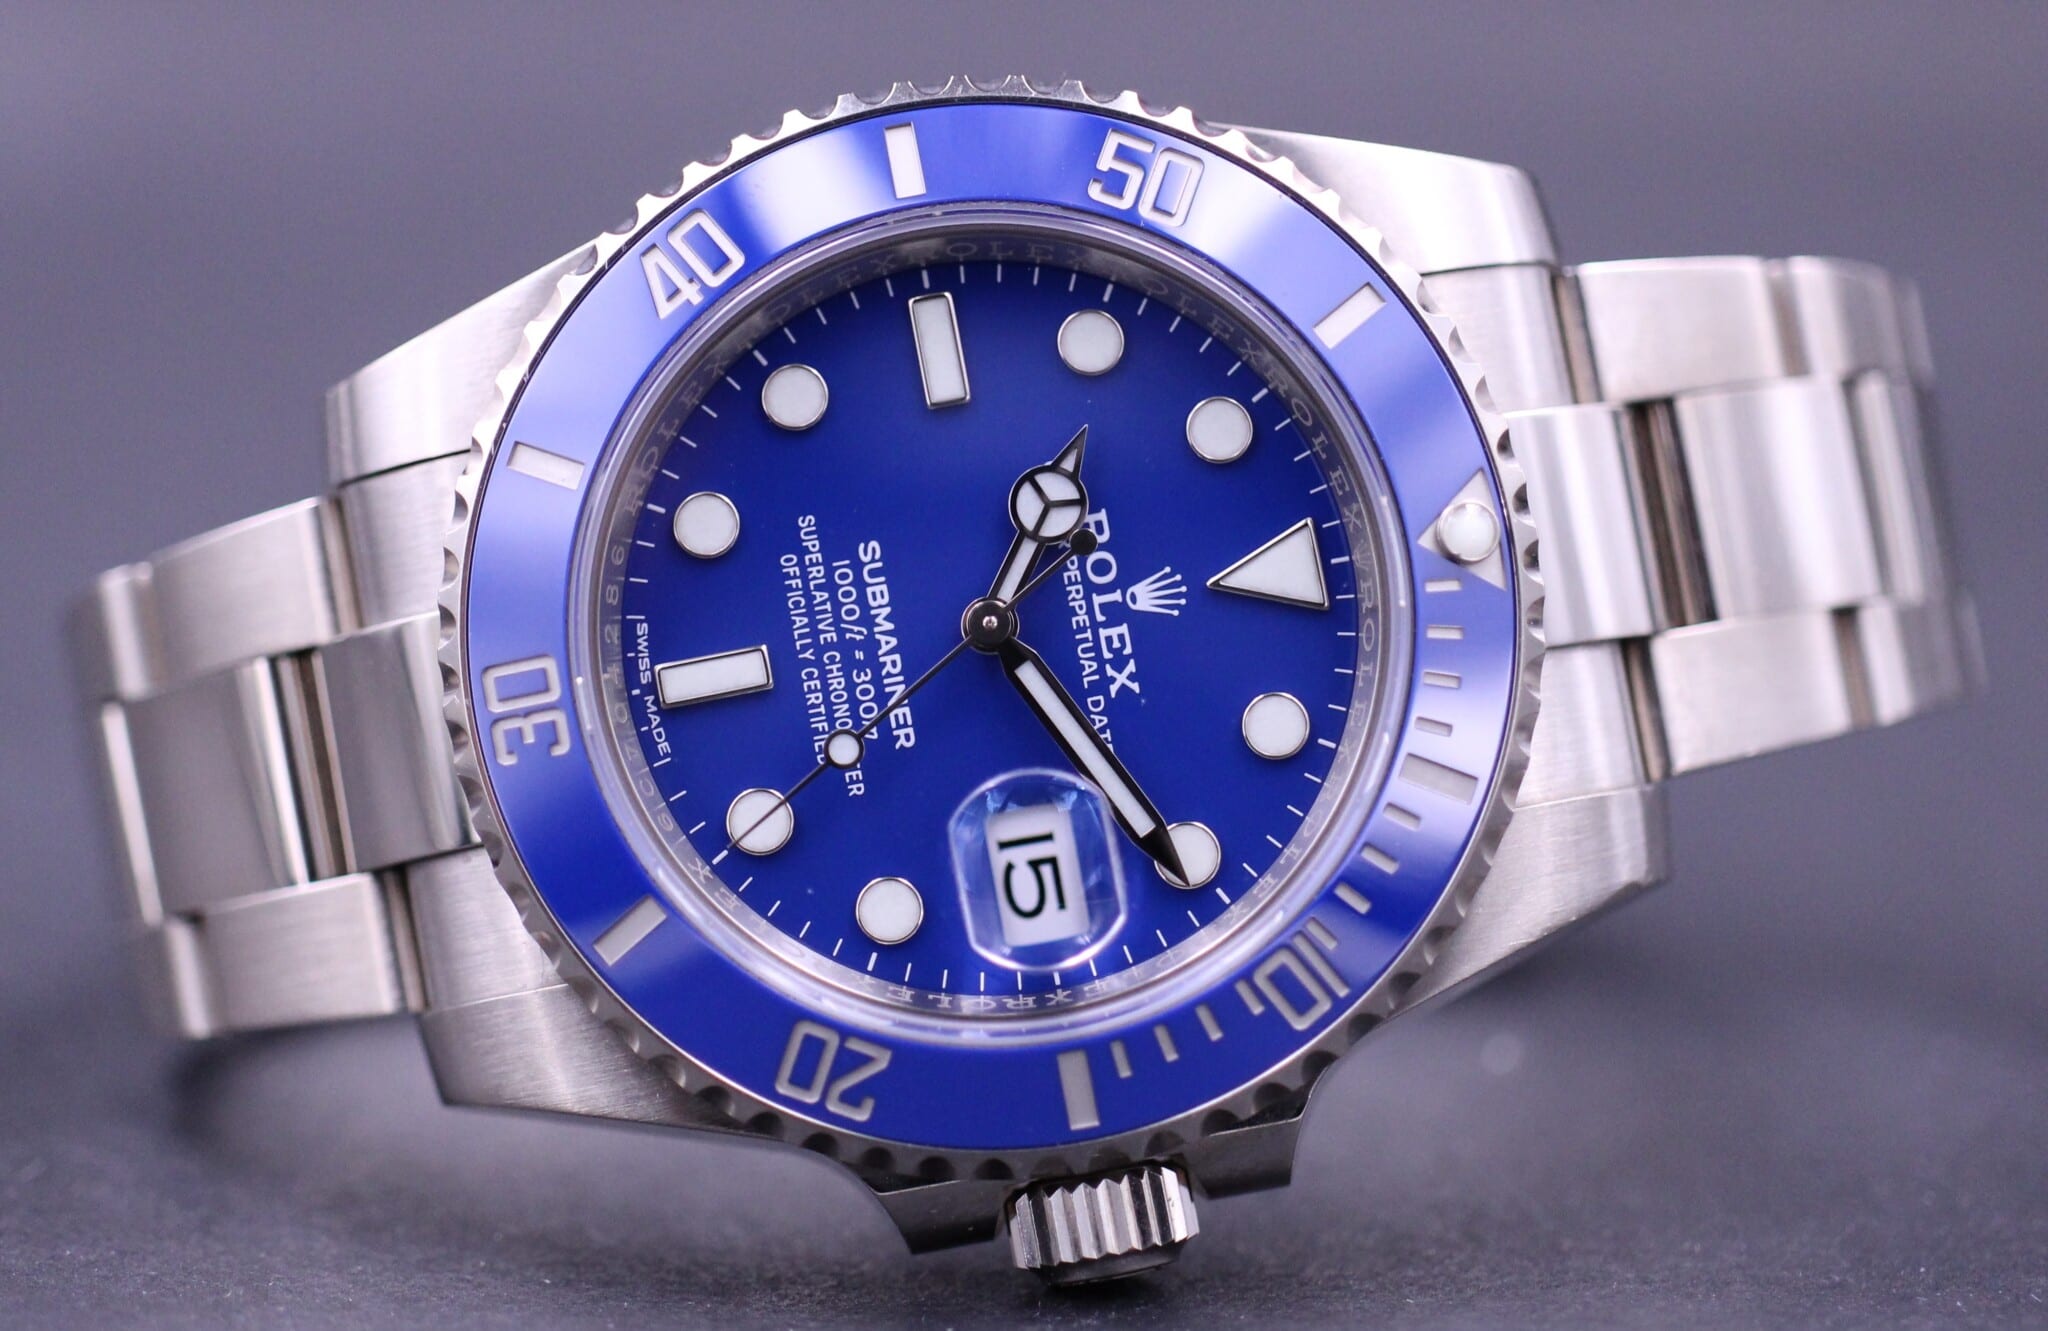 SUBMARINER 116619LB | MM Watches